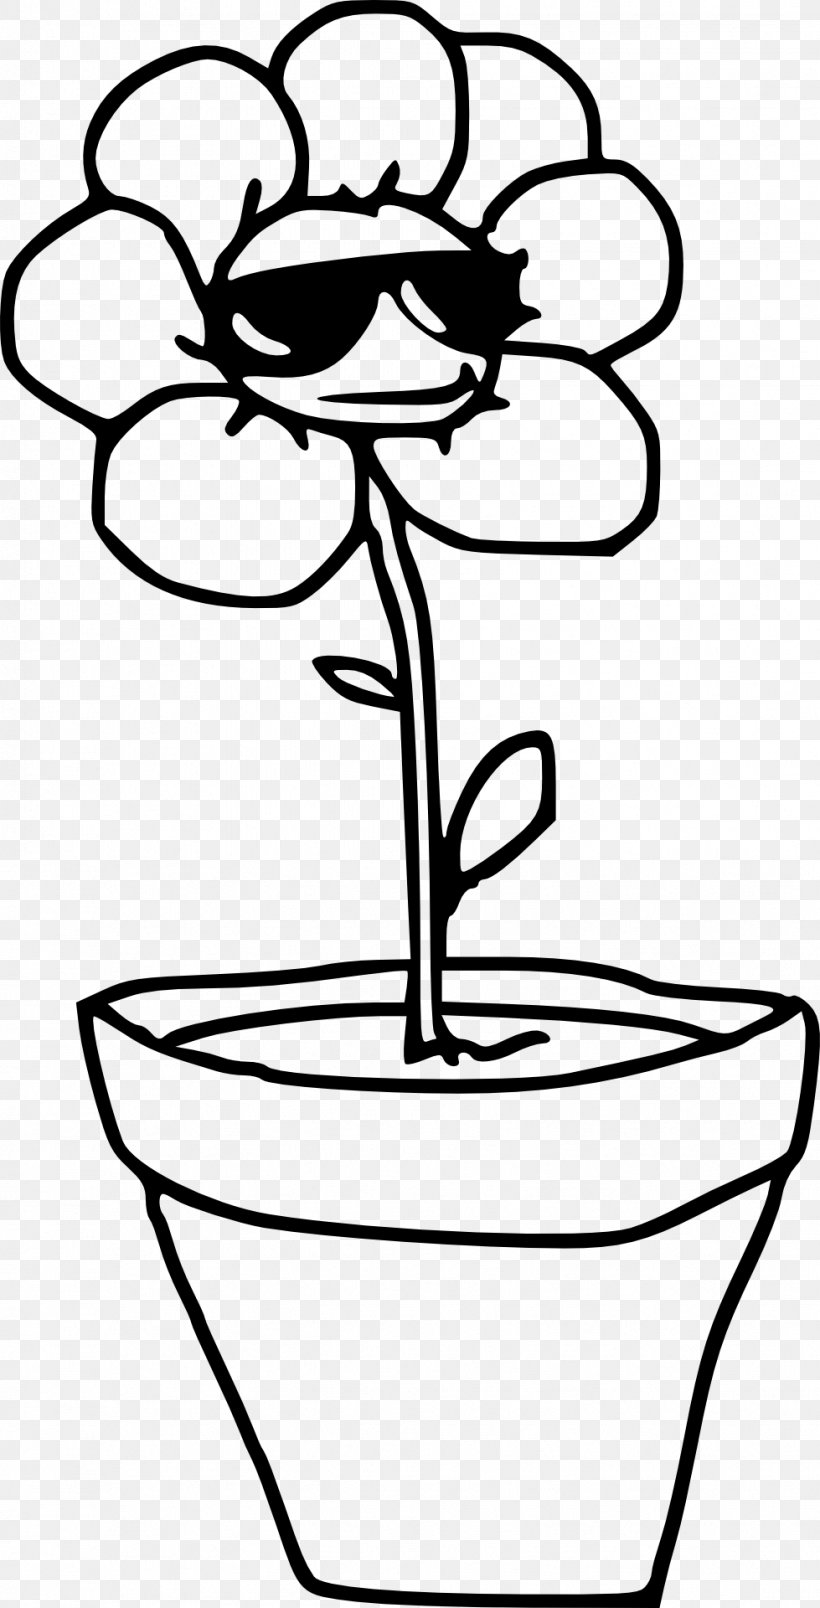 Flowerpot Clip Art, PNG, 979x1920px, Flower, Artwork, Black And White, Cannabis, Drawing Download Free